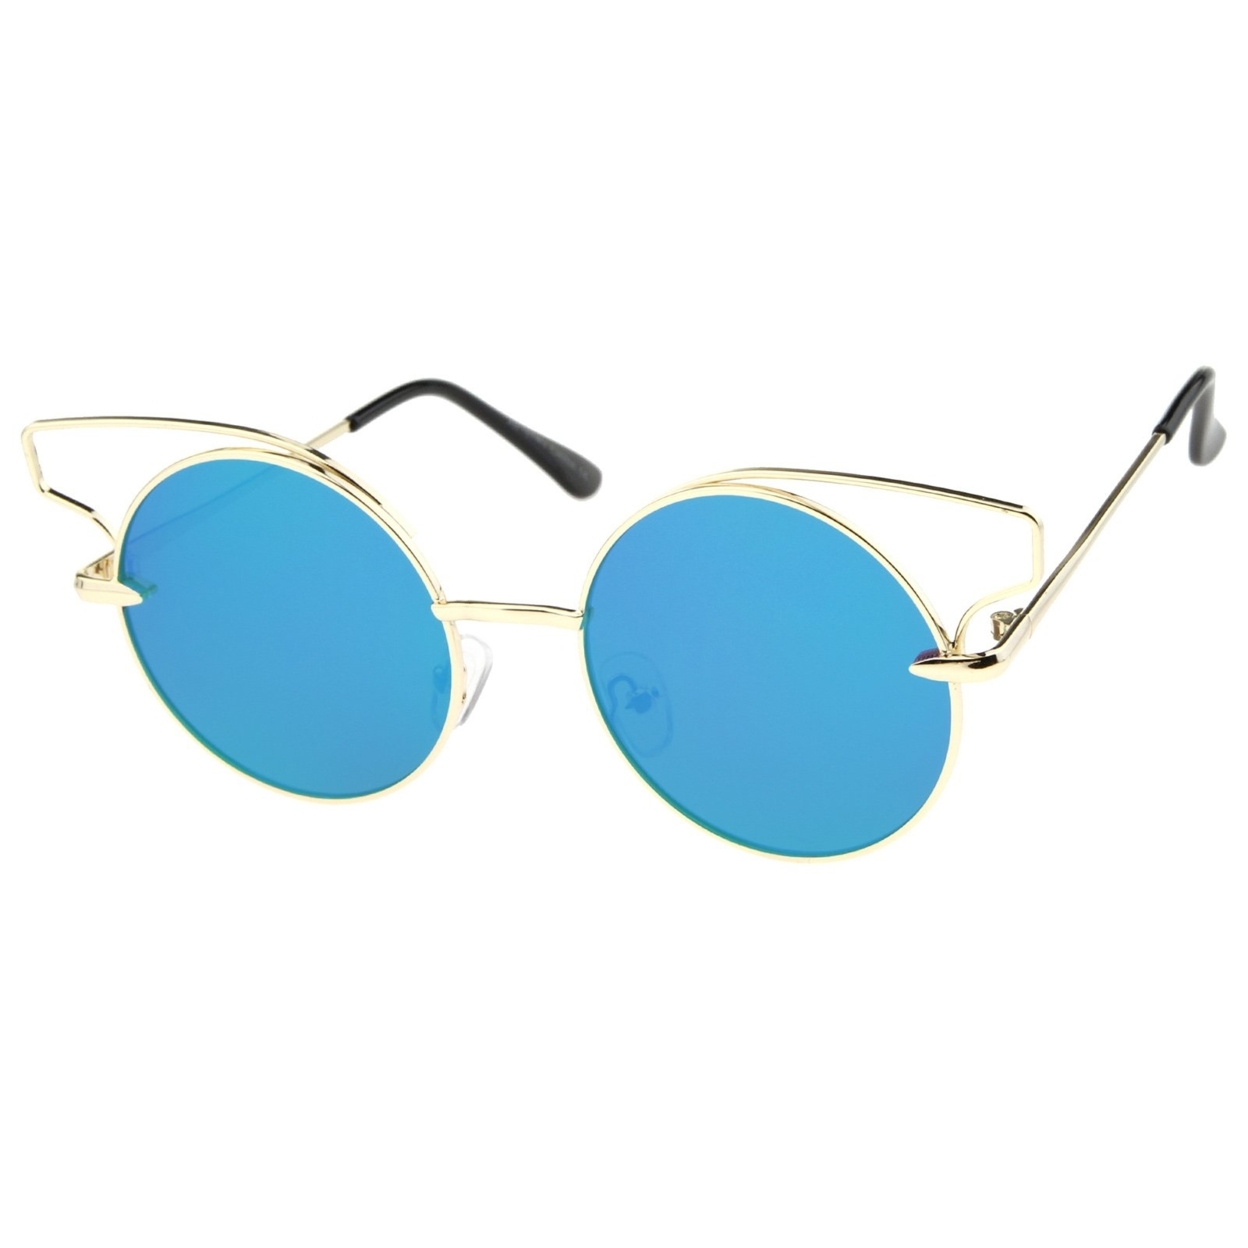 Women's Wire Open Metal Frame Color Mirror Flat Lens Round Cat Eye Sunglasses 52mm - Gold / Blue Mirror